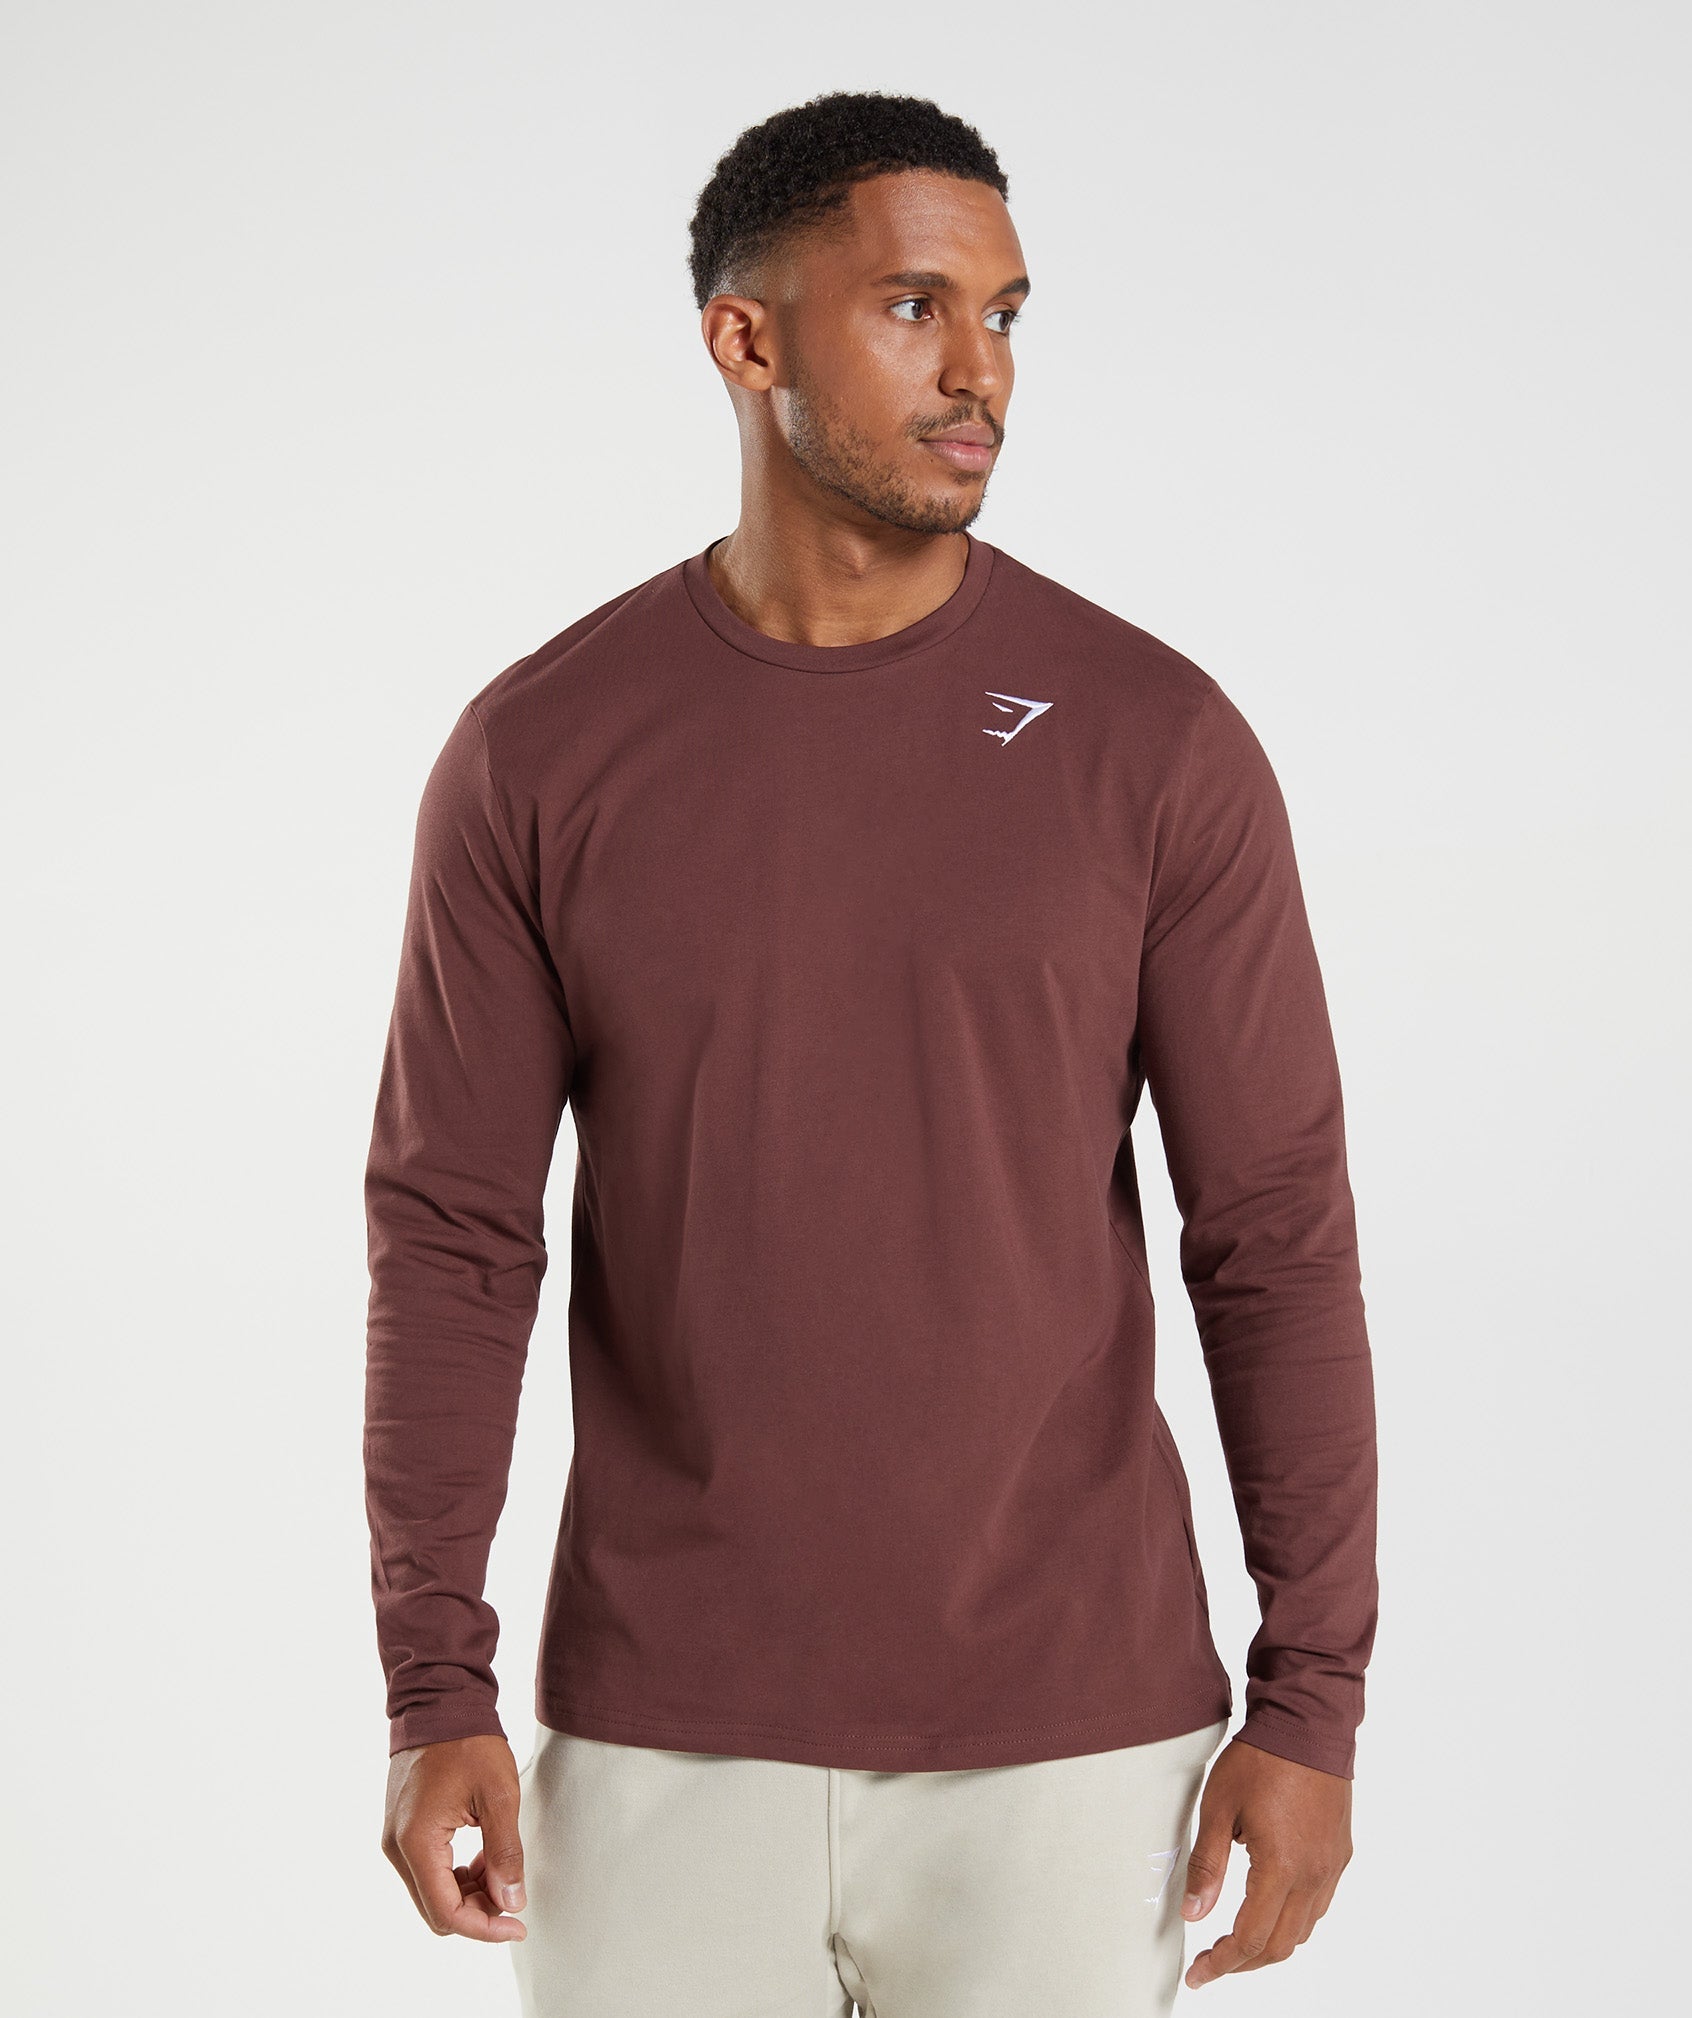 Crest Long Sleeve T-Shirt in Cherry Brown - view 1